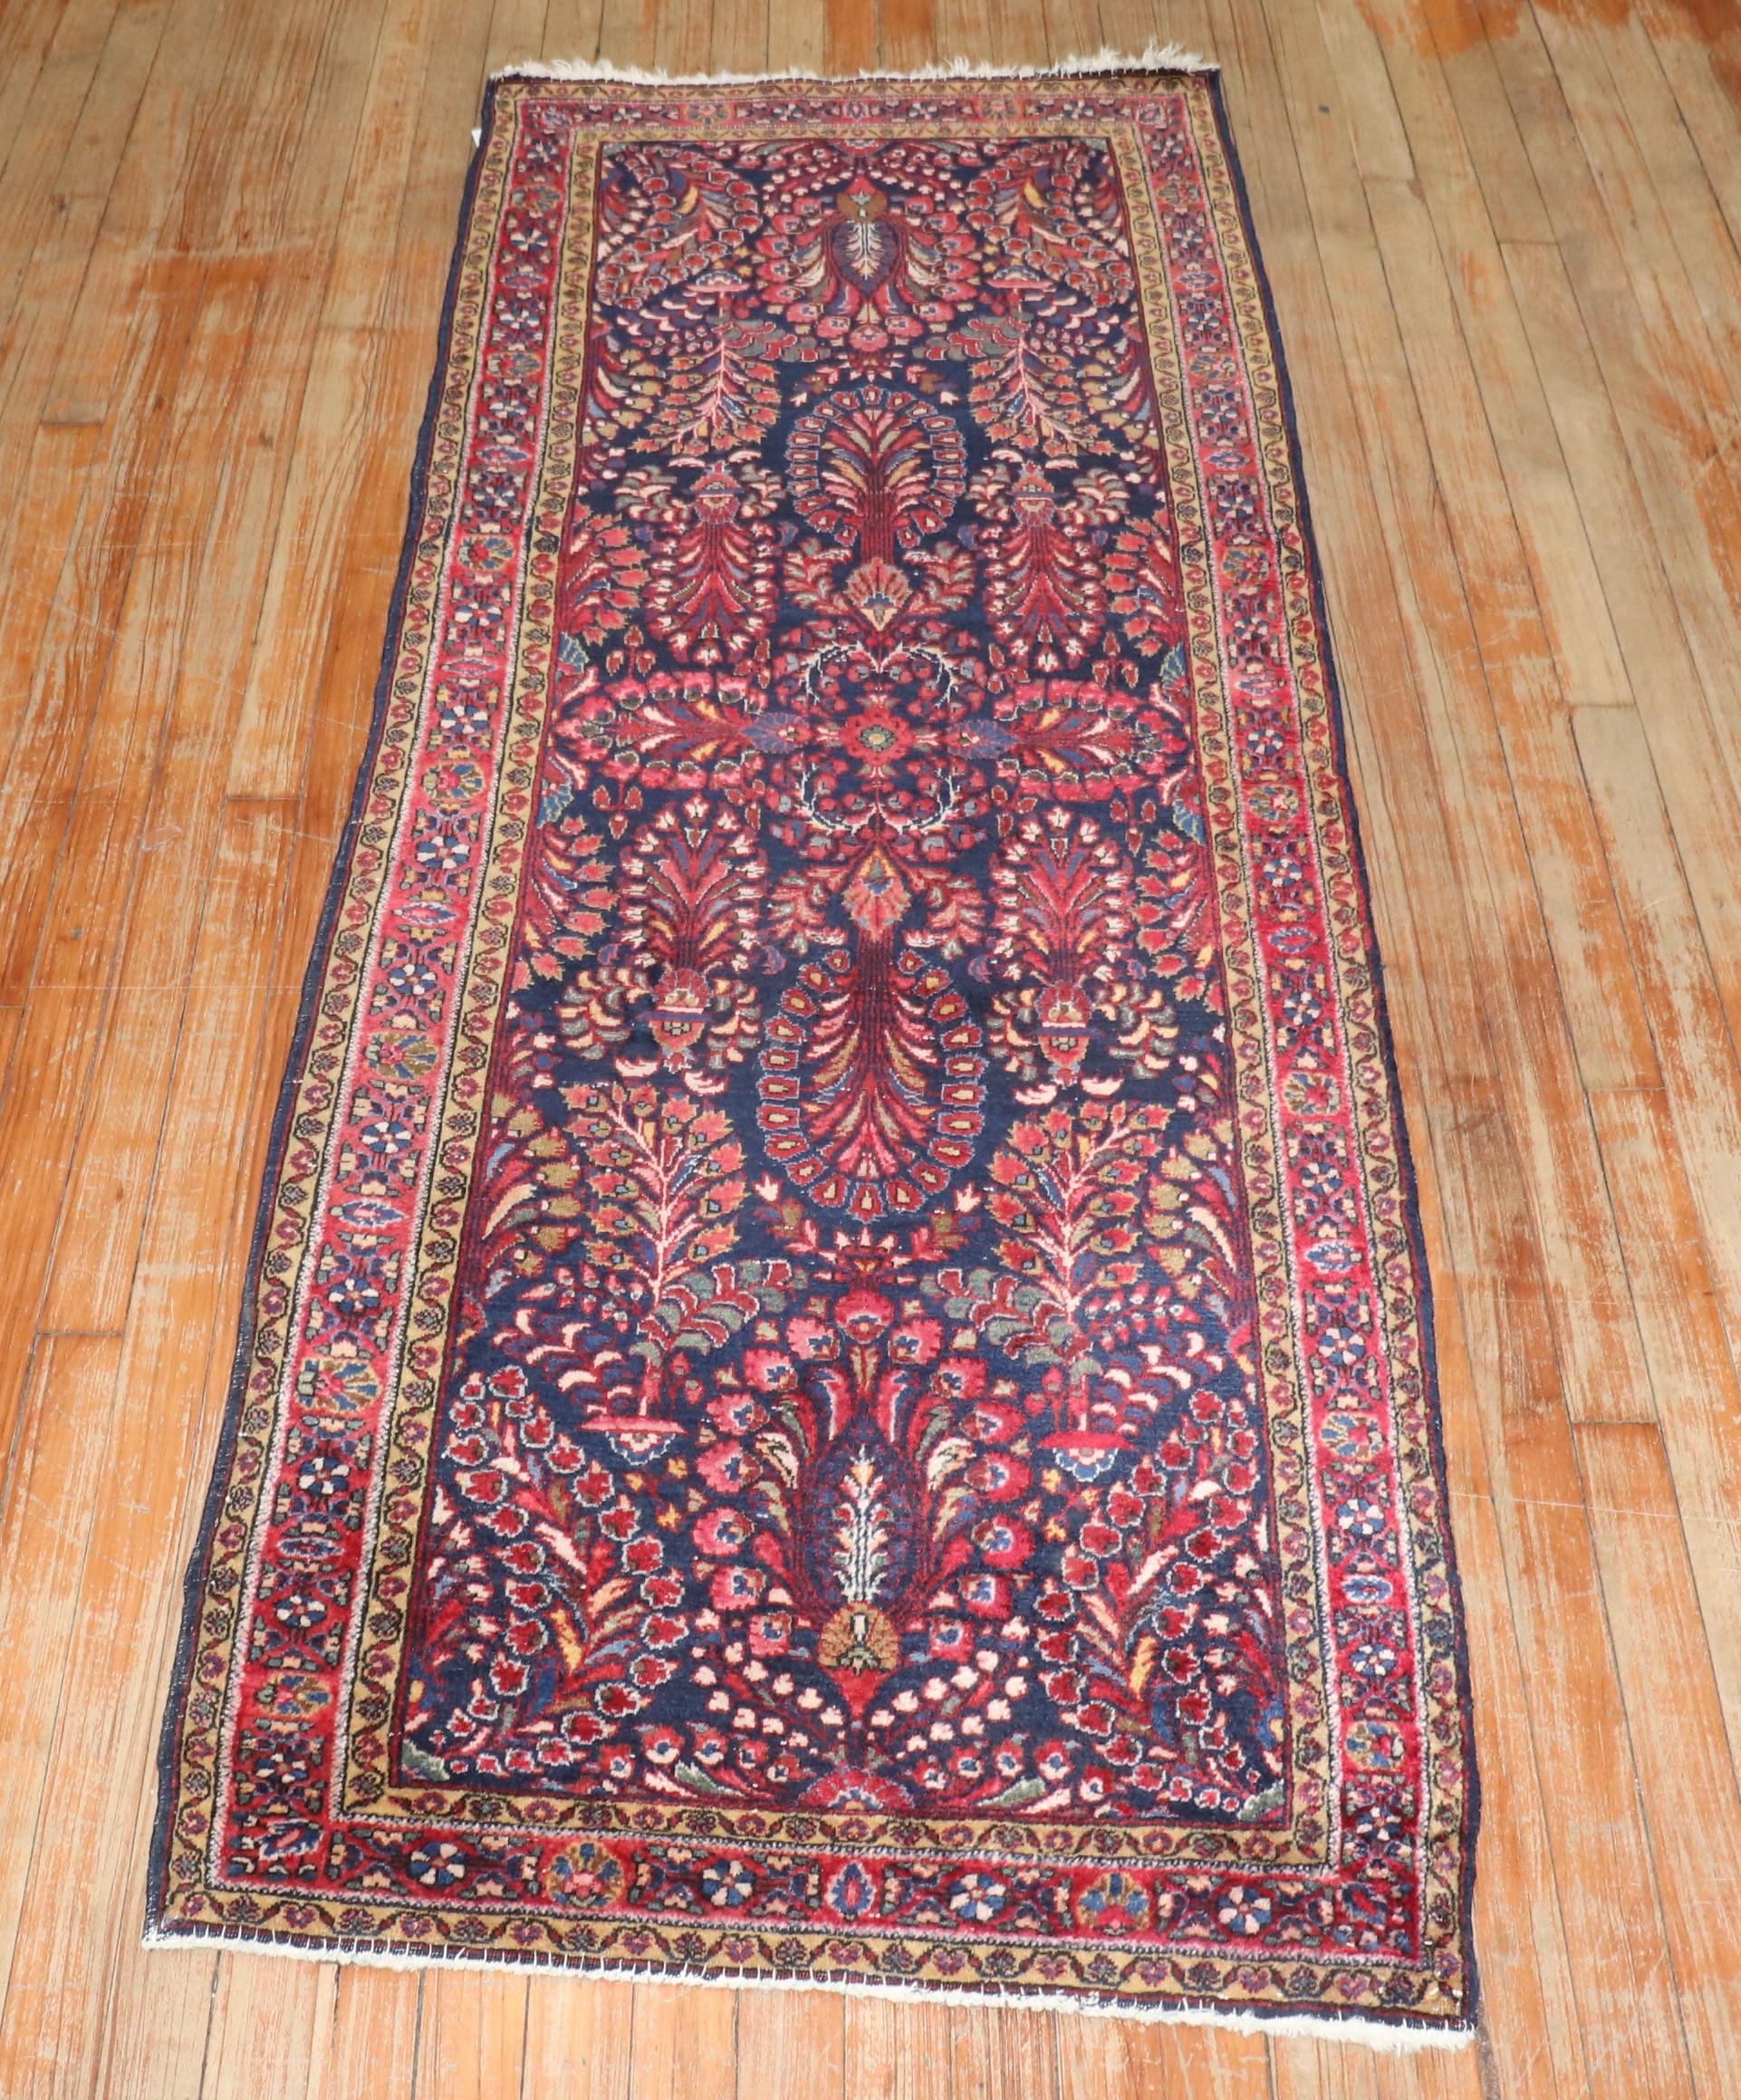 1920s Persian Sarouk small runner with a navy ground and floral design

2'6'' x 6'6''
.